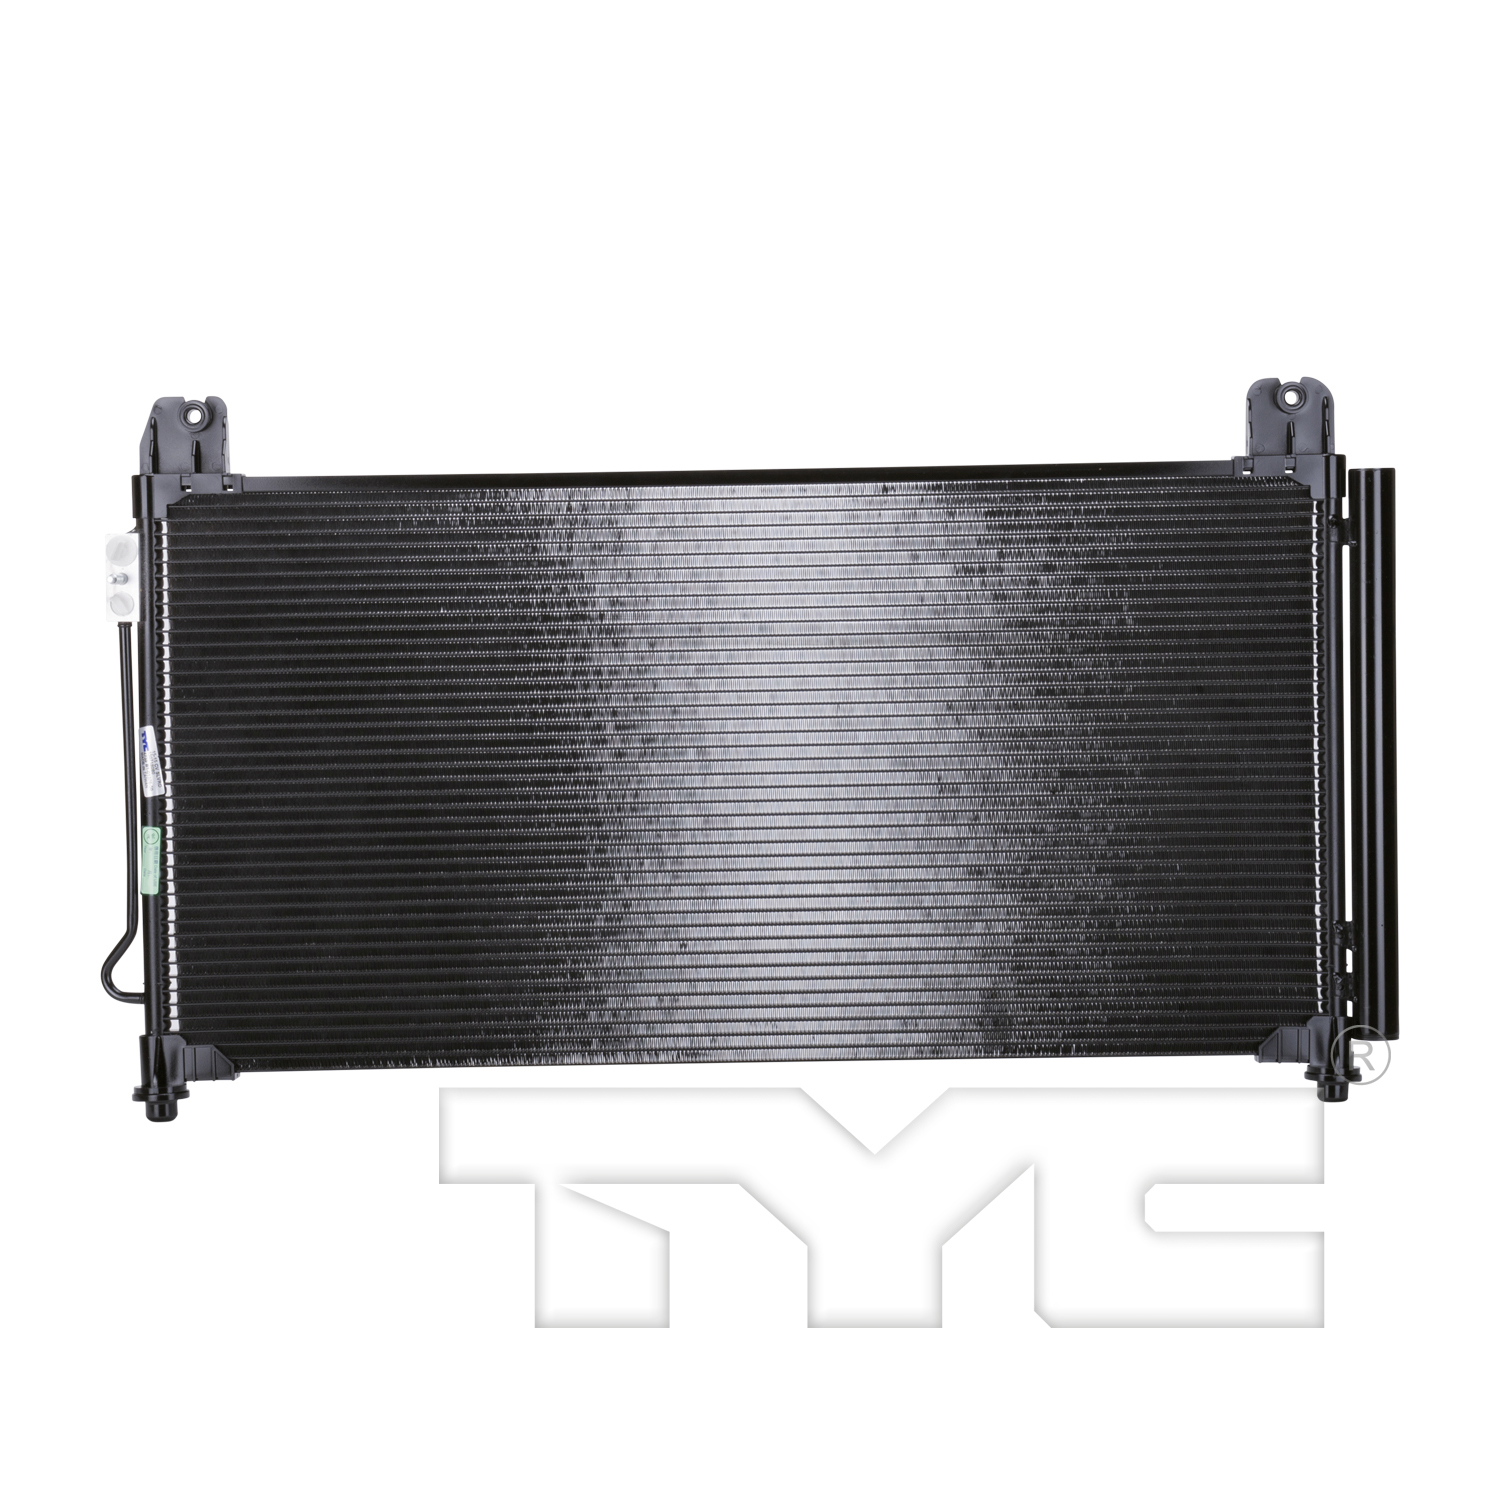 Aftermarket AC CONDENSERS for CHEVROLET - SILVERADO 3500 HD, SILVERADO 3500 HD,15-19,Air conditioning condenser